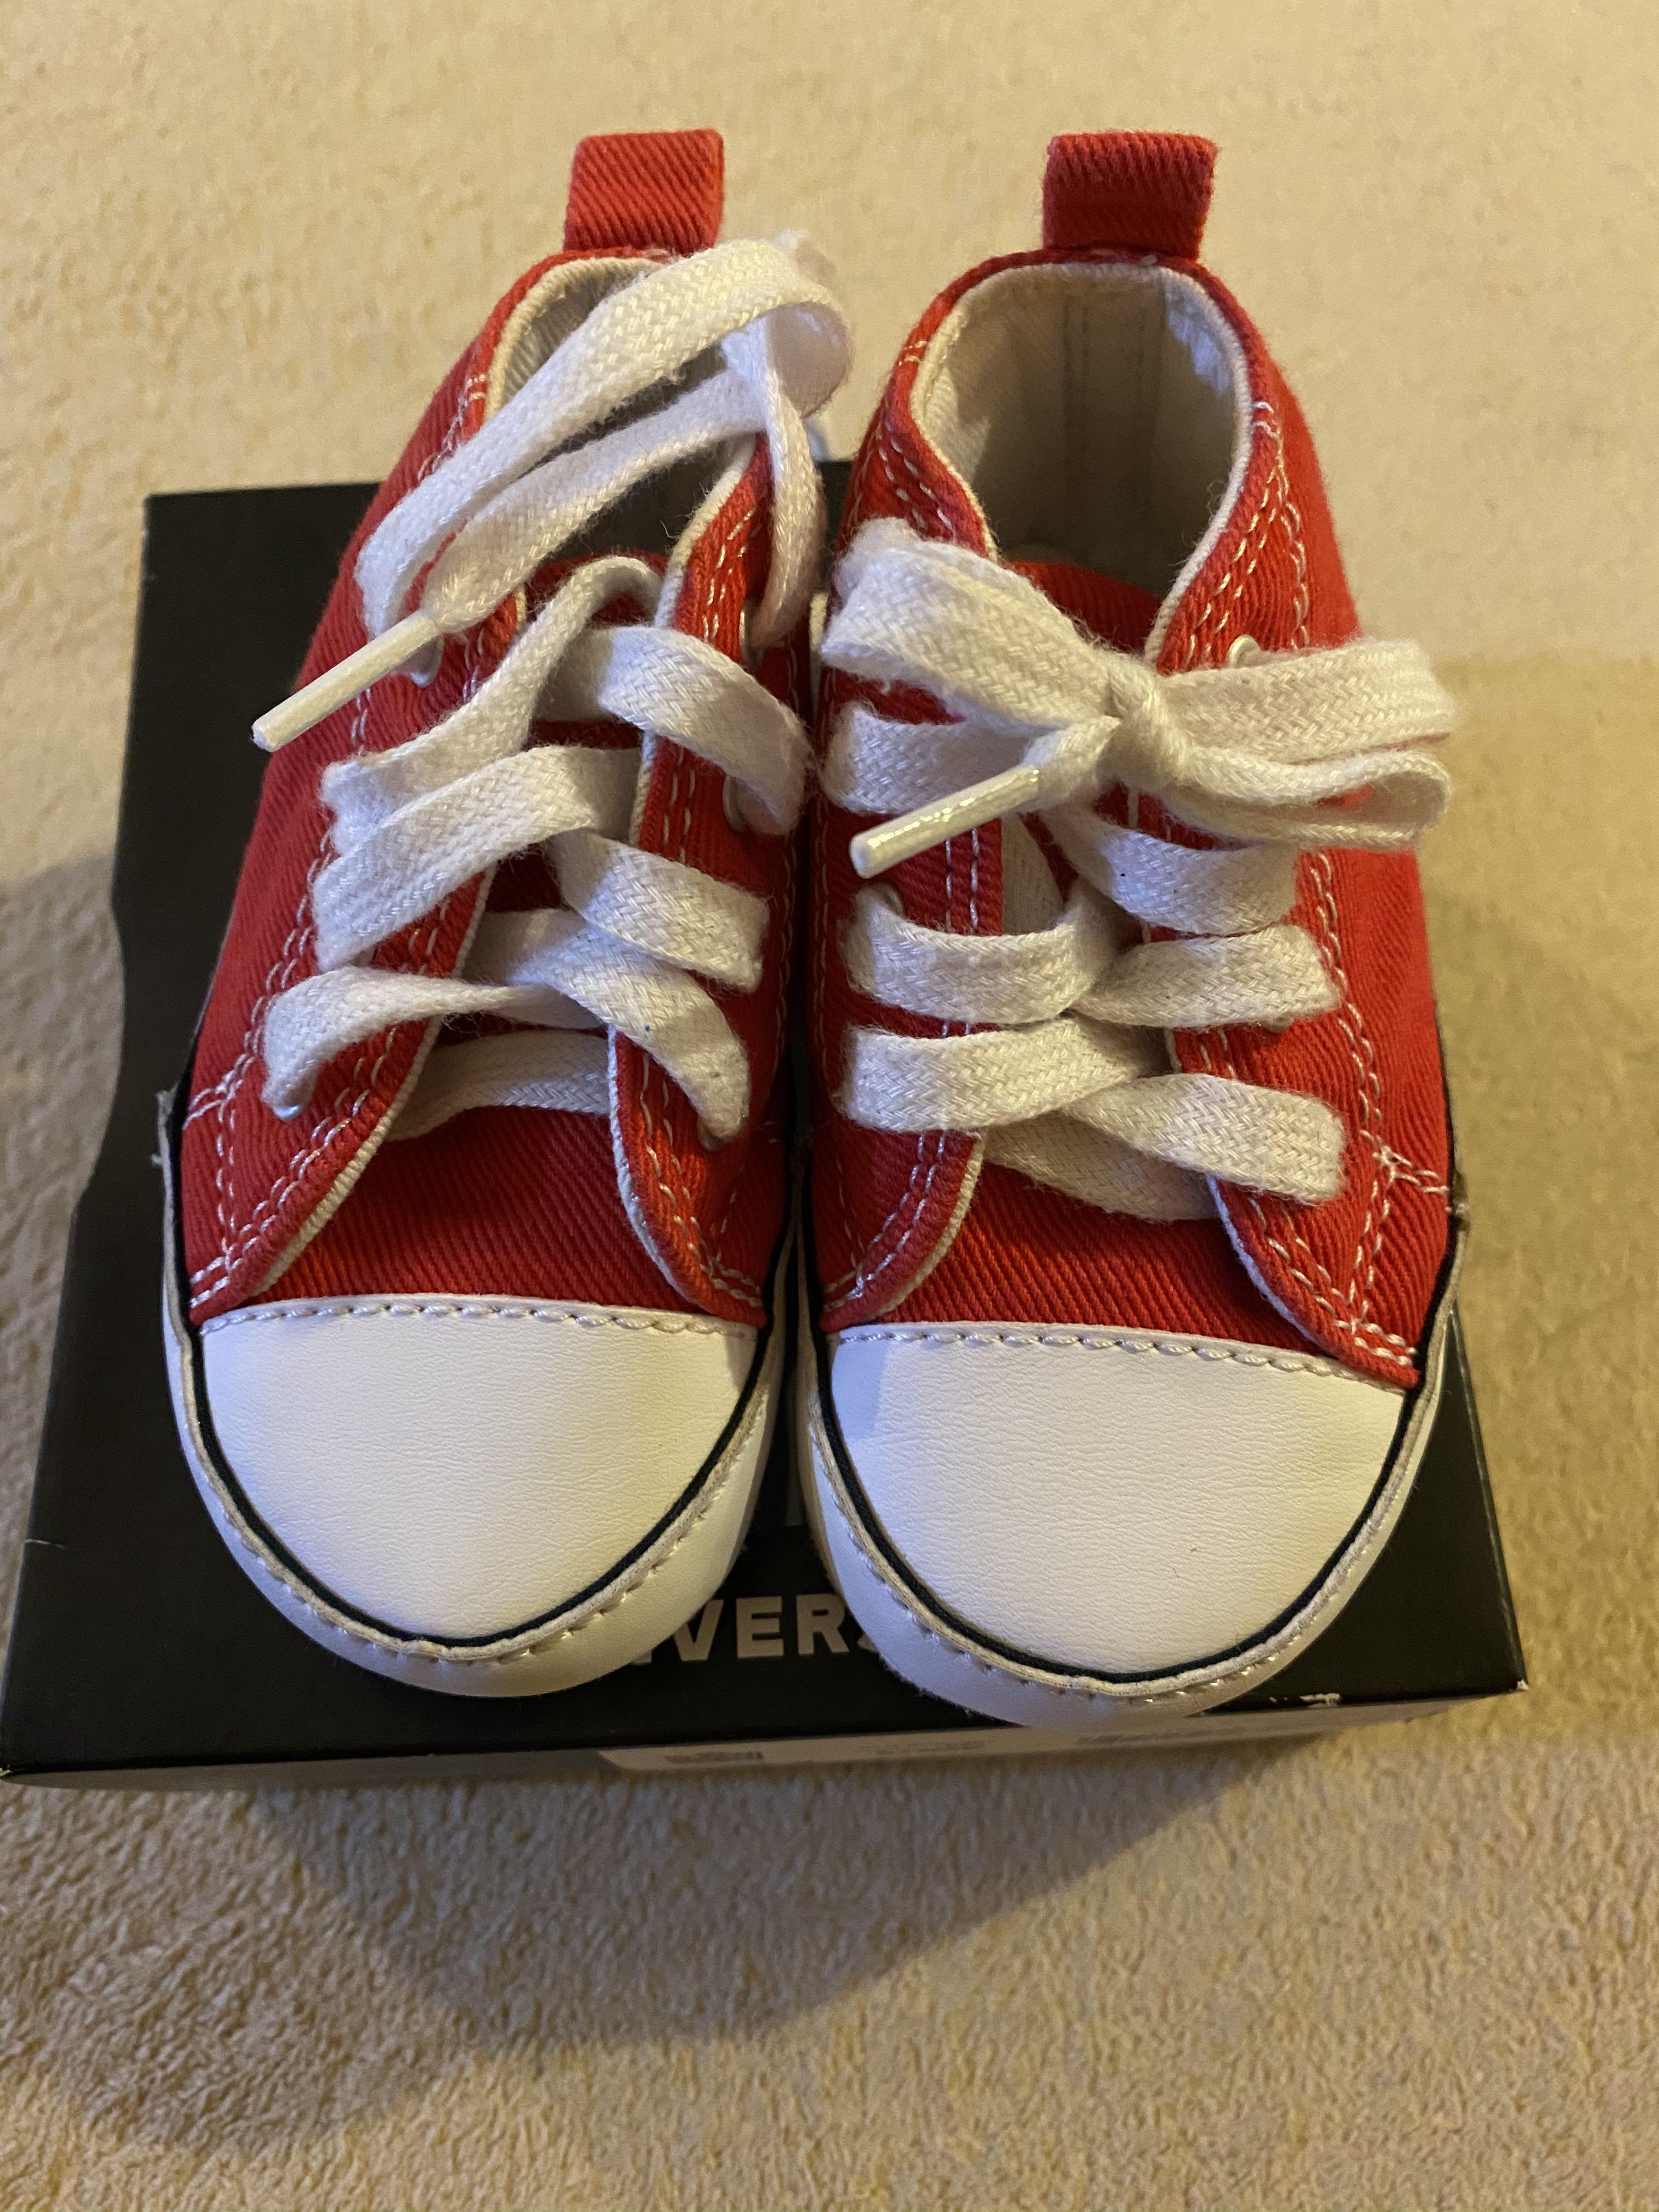 red converse size 1